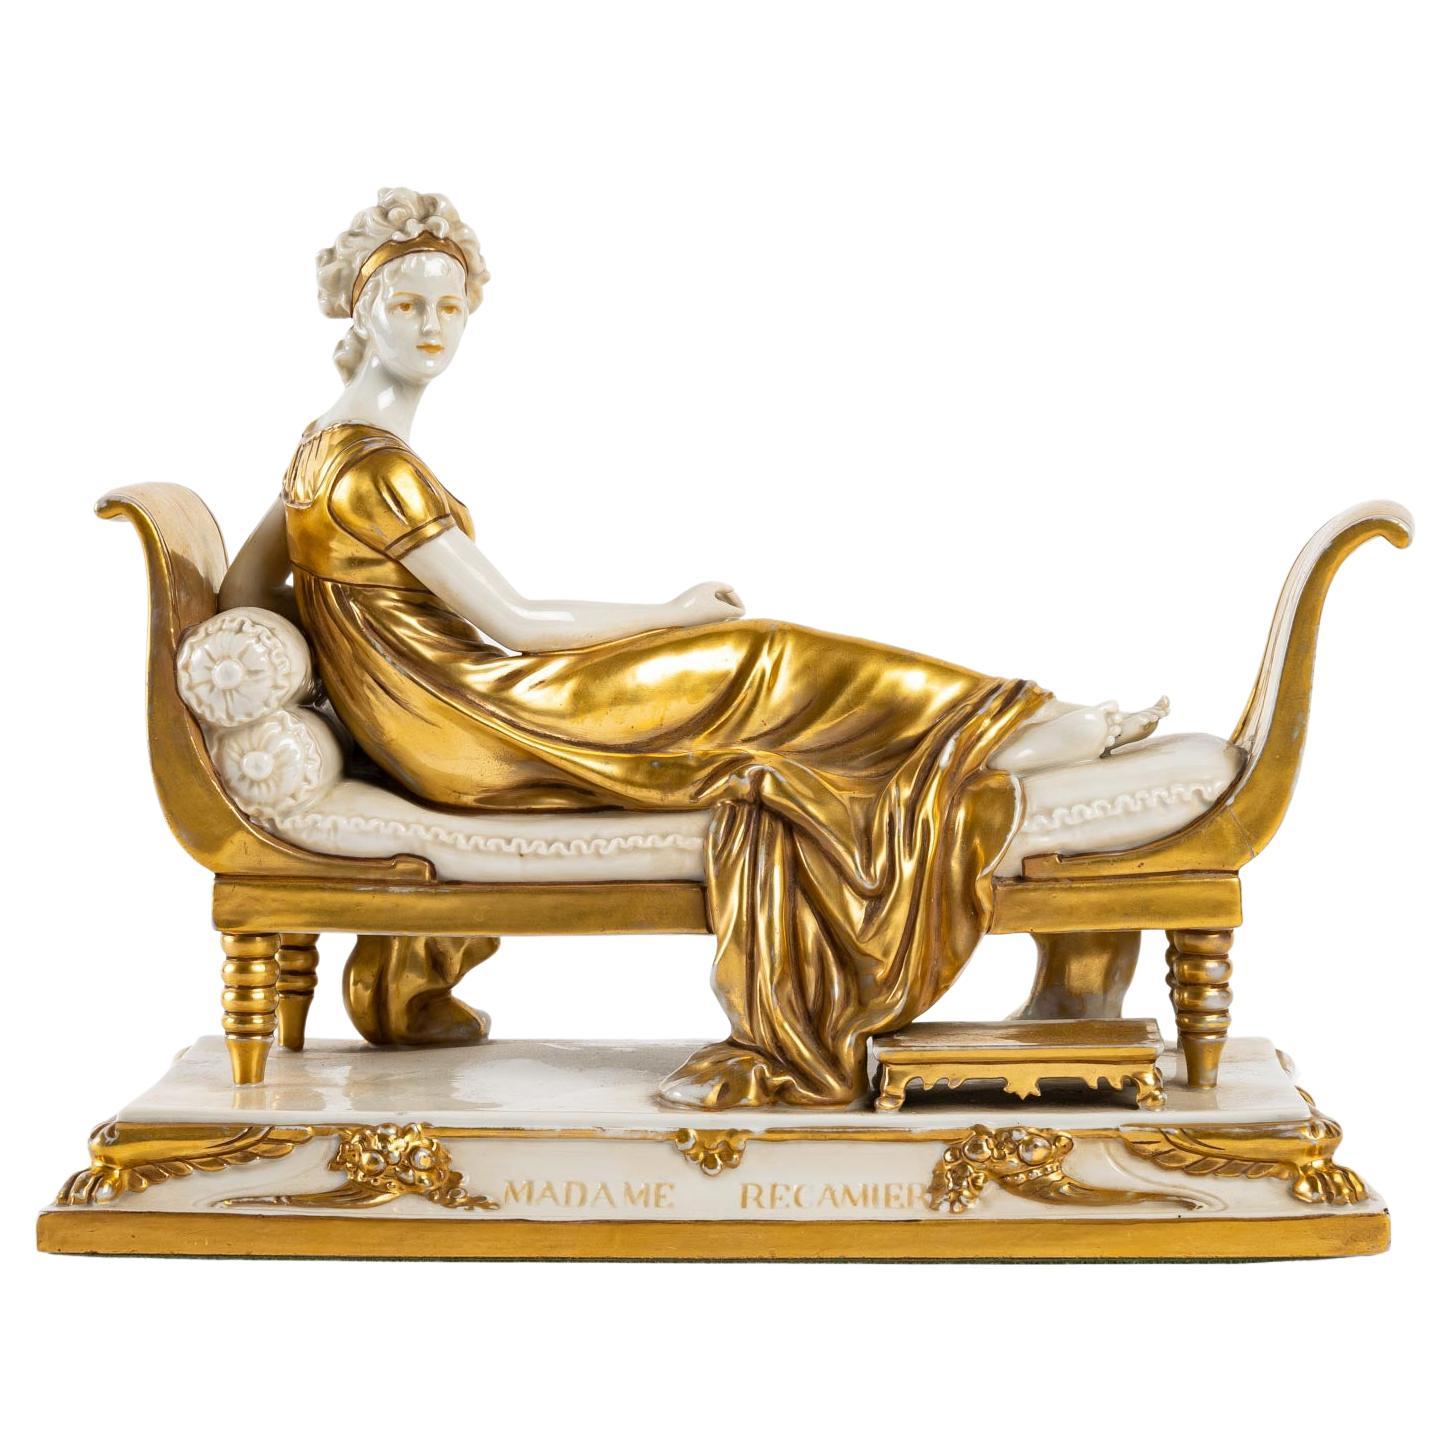 Madame Récamier in White and Gold Porcelain